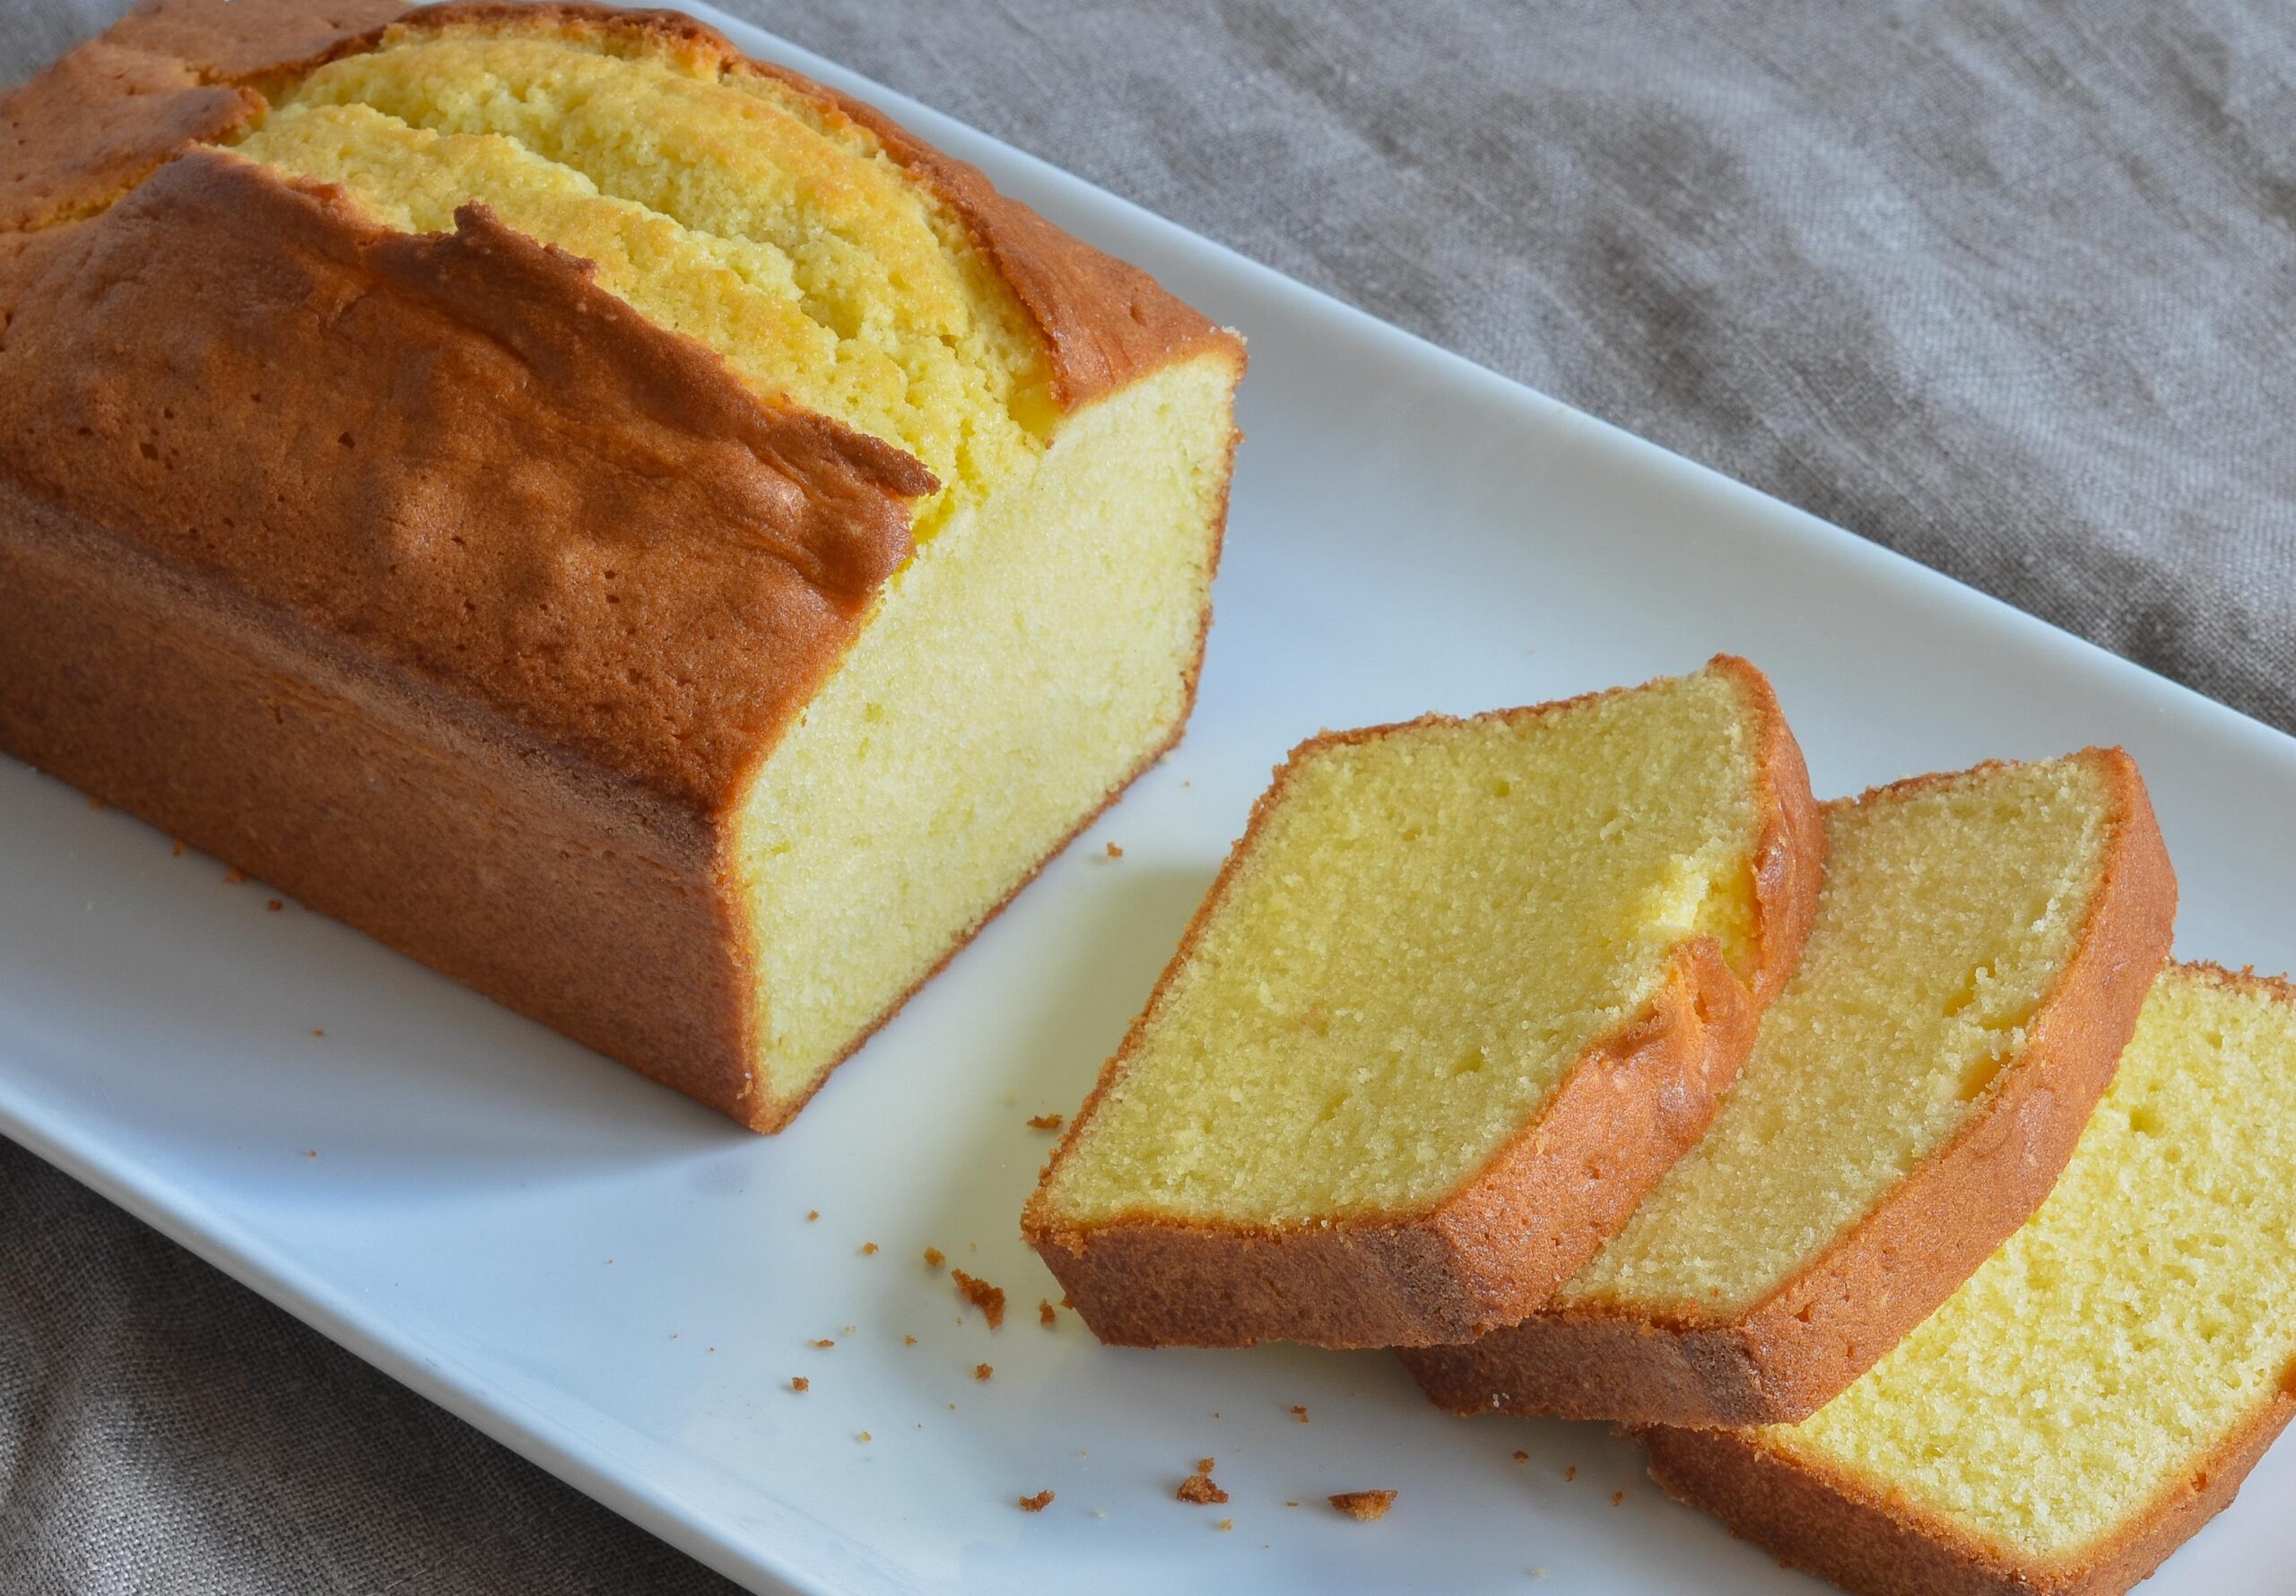  Perfect golden crust and tender, moist cake!